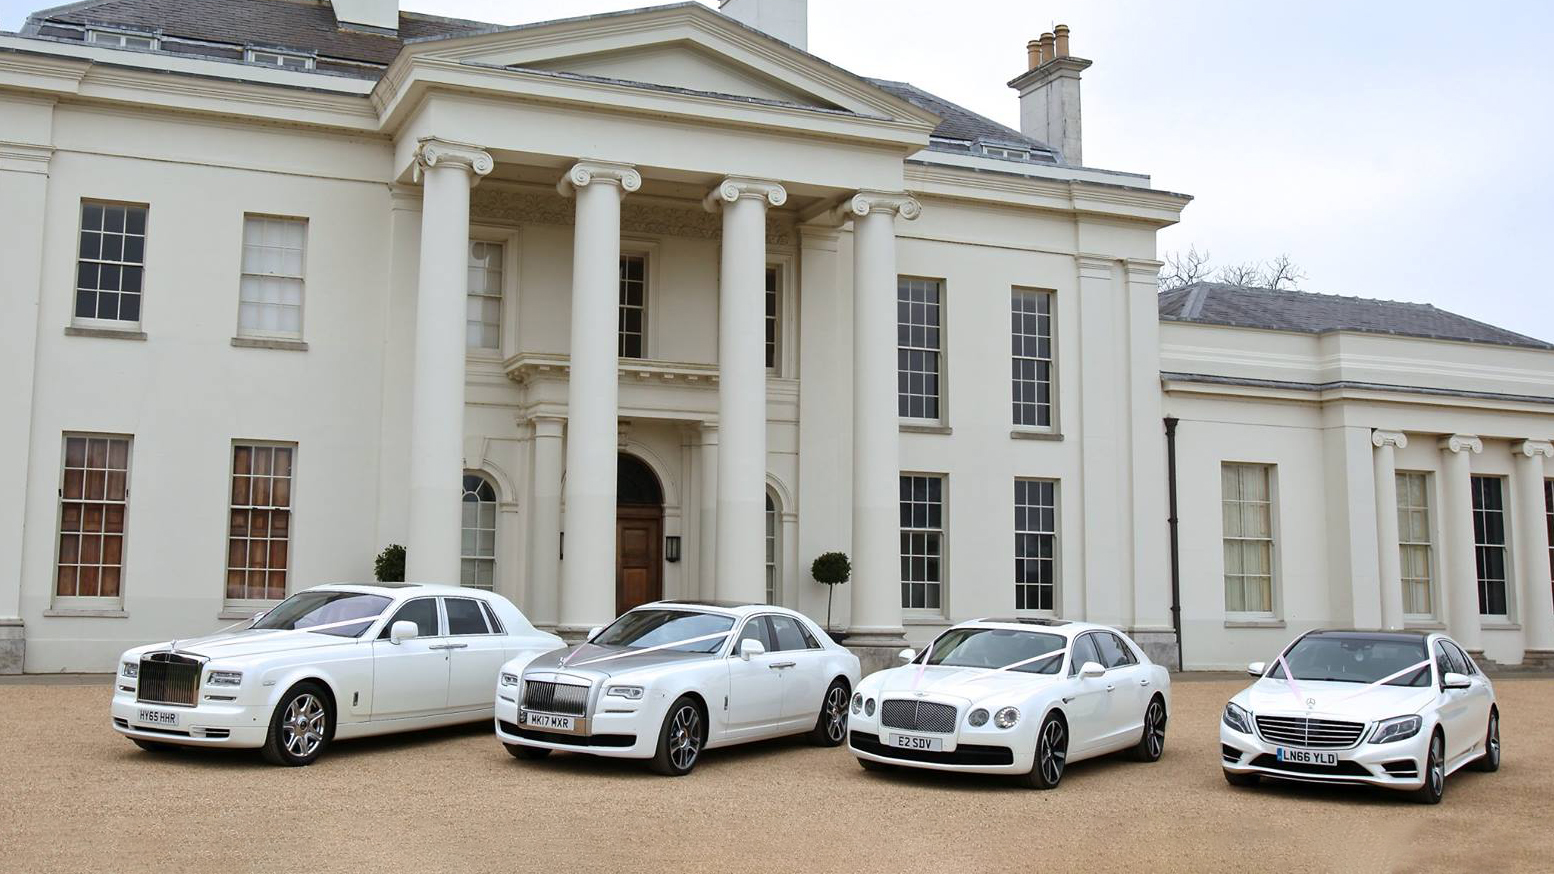 A selection of white Luxurious and modern vehicles all decorated with matching white ribbons on wedding duties in Marston Moretaine. Frot Left to right: Rolls-Royce Phantom, Rolls-